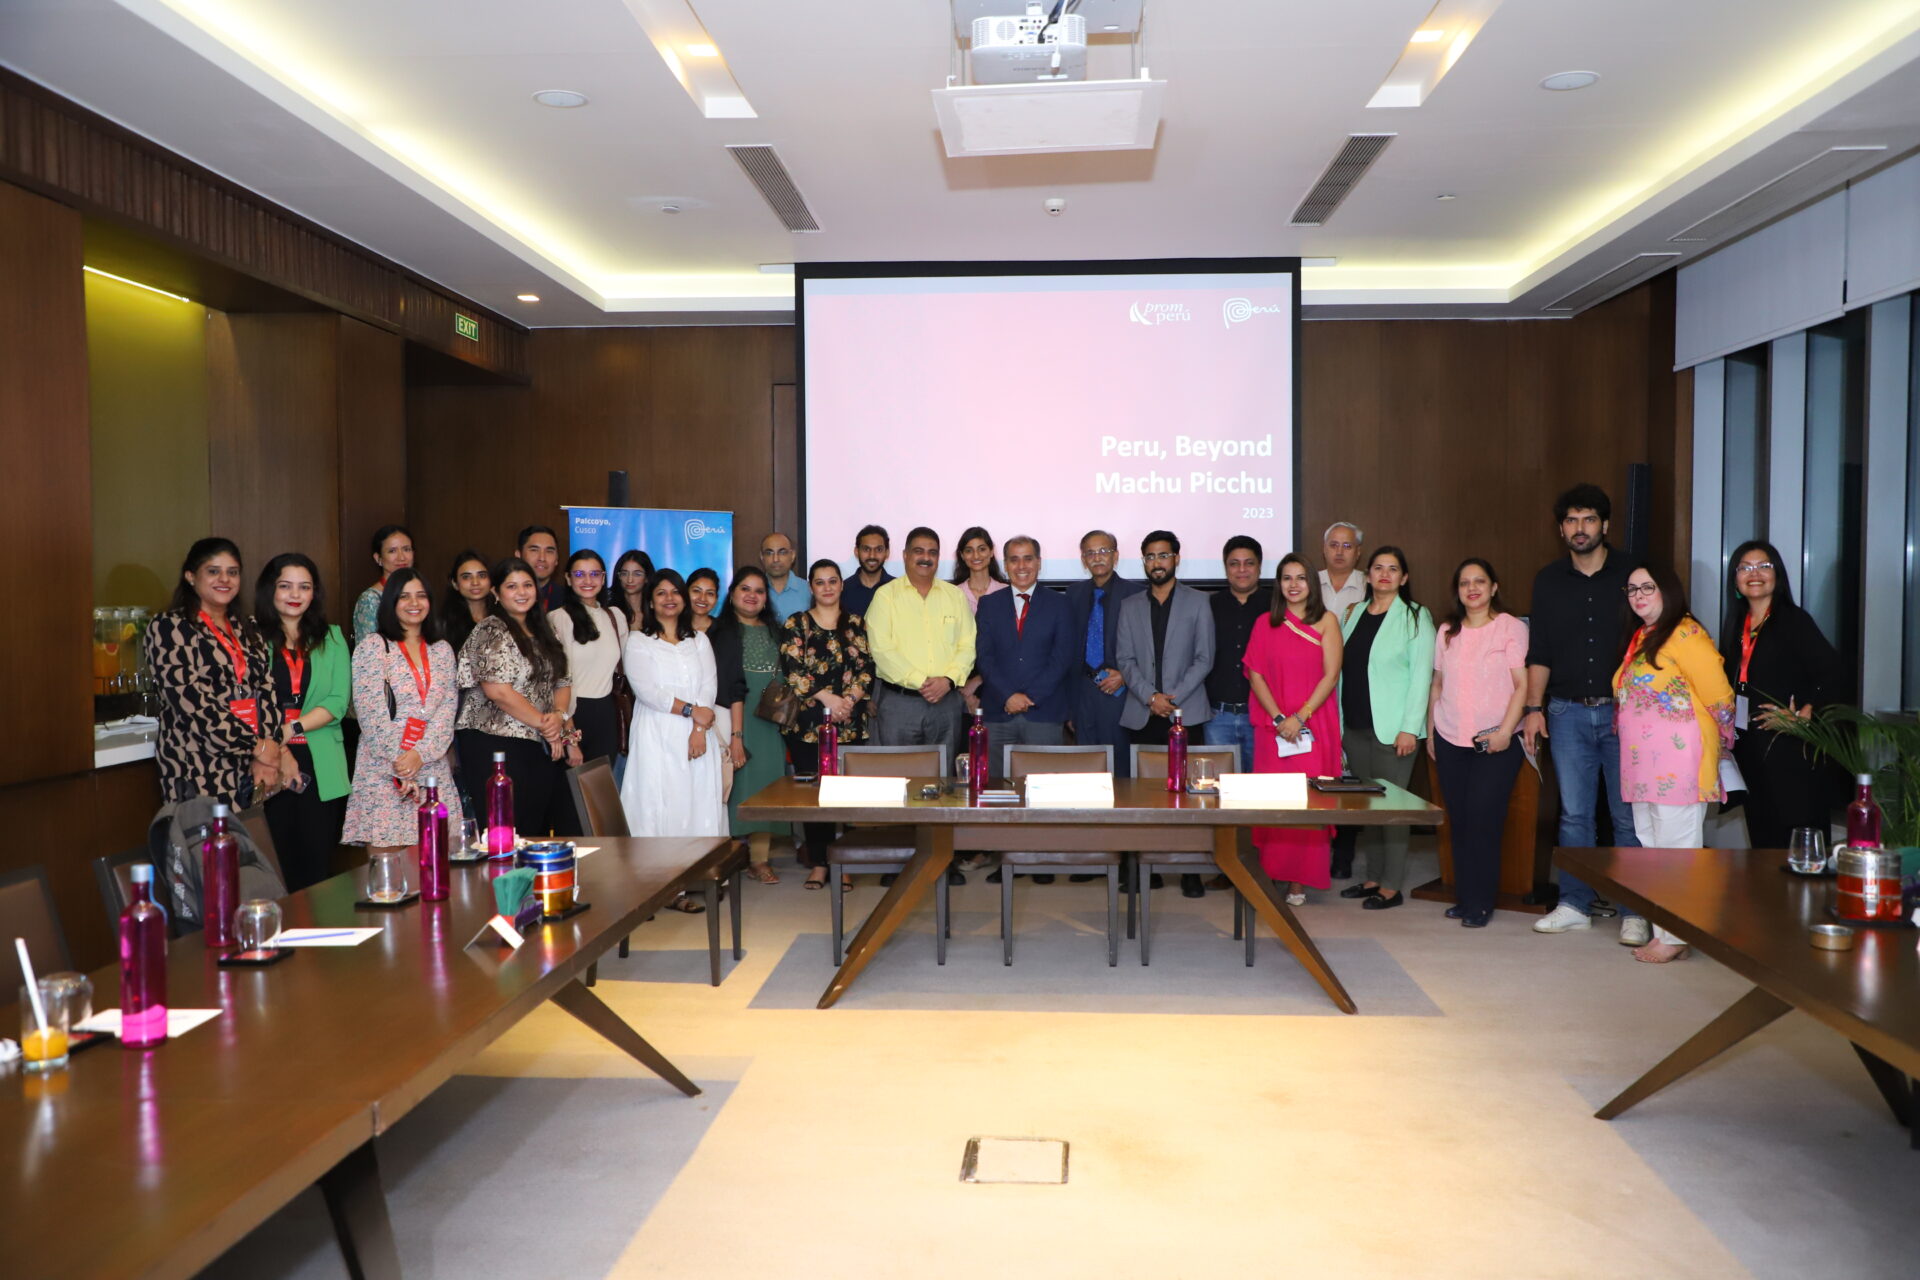 PROMPERU conducts maiden two-city roadshow in India; brings in 15 exhibitors